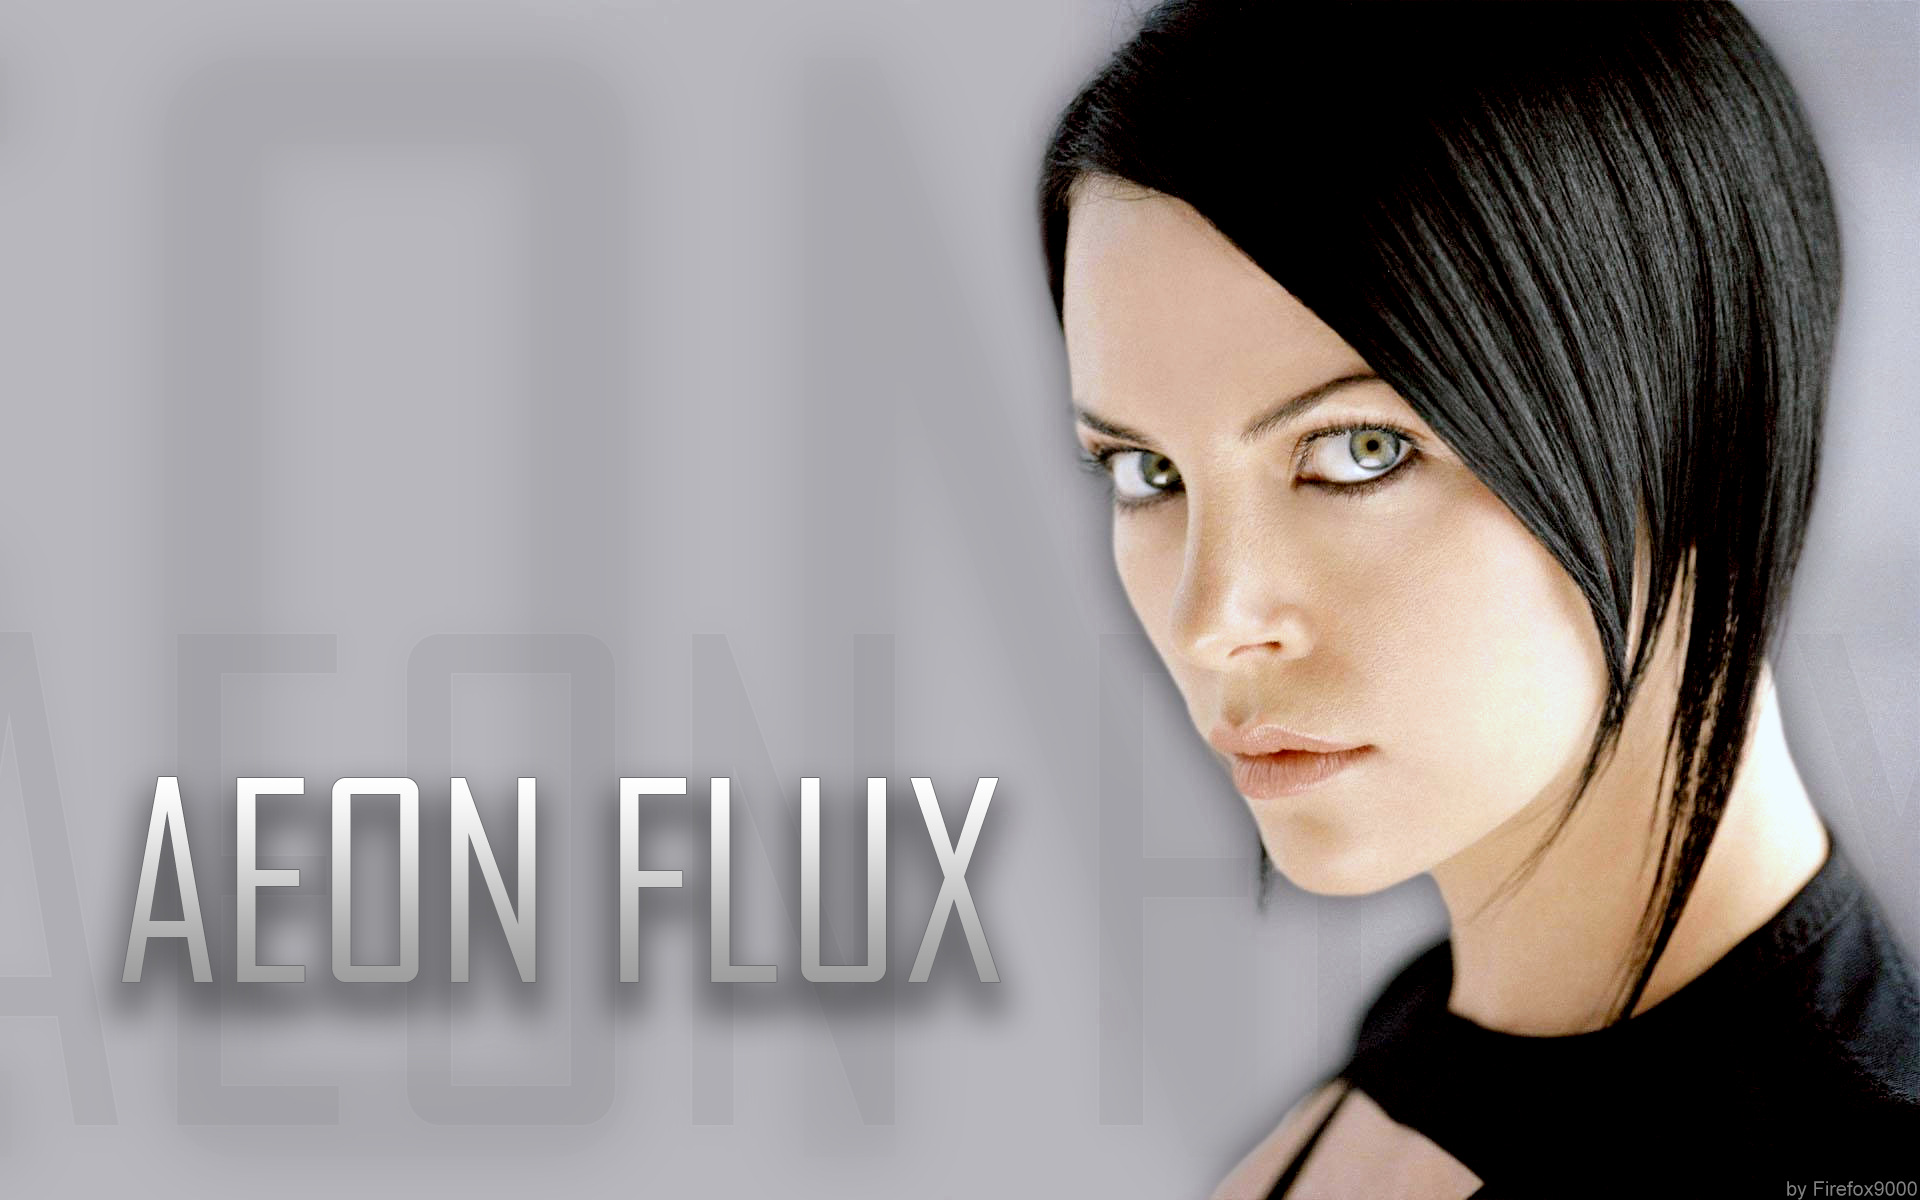 People 1920x1200 Aeon Flux Charlize Theron black hair looking at viewer women eyes actress movies